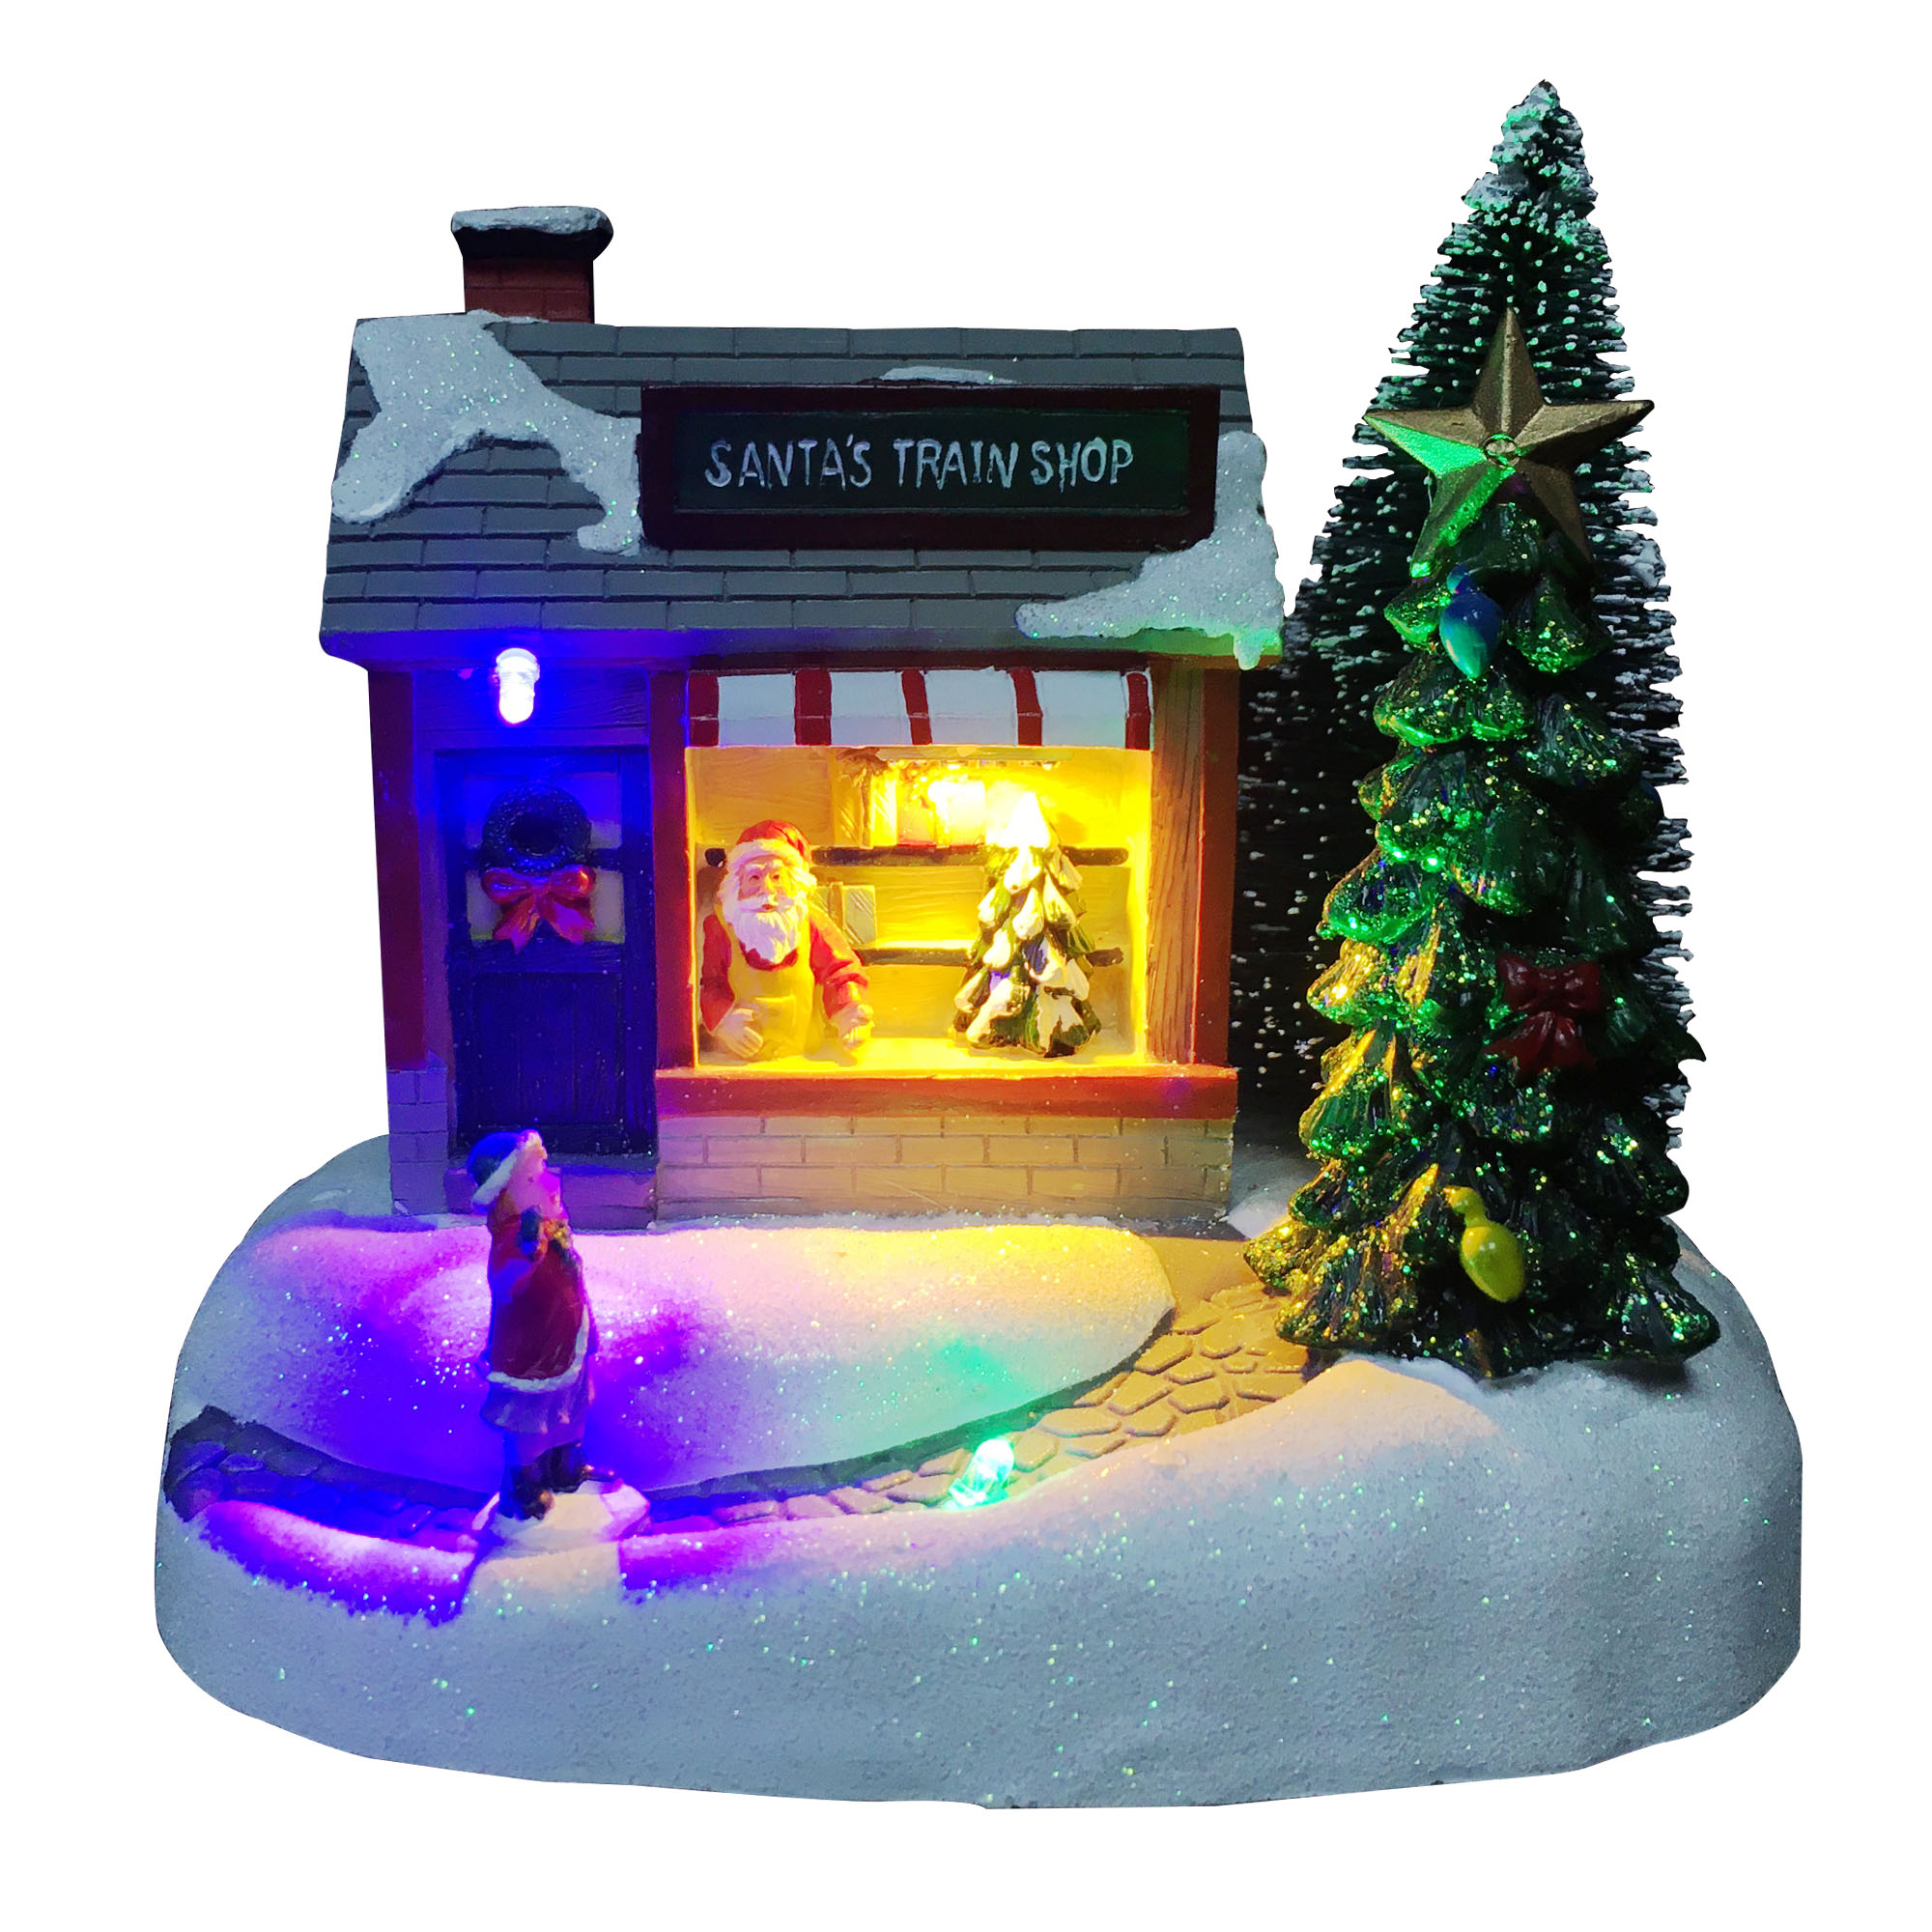 Super Lowest Price Full Christmas Village Set - Melody colorful Xmas village Christmas Decoration Santa’s Train Shop scene led lighted Christmas house – Melody